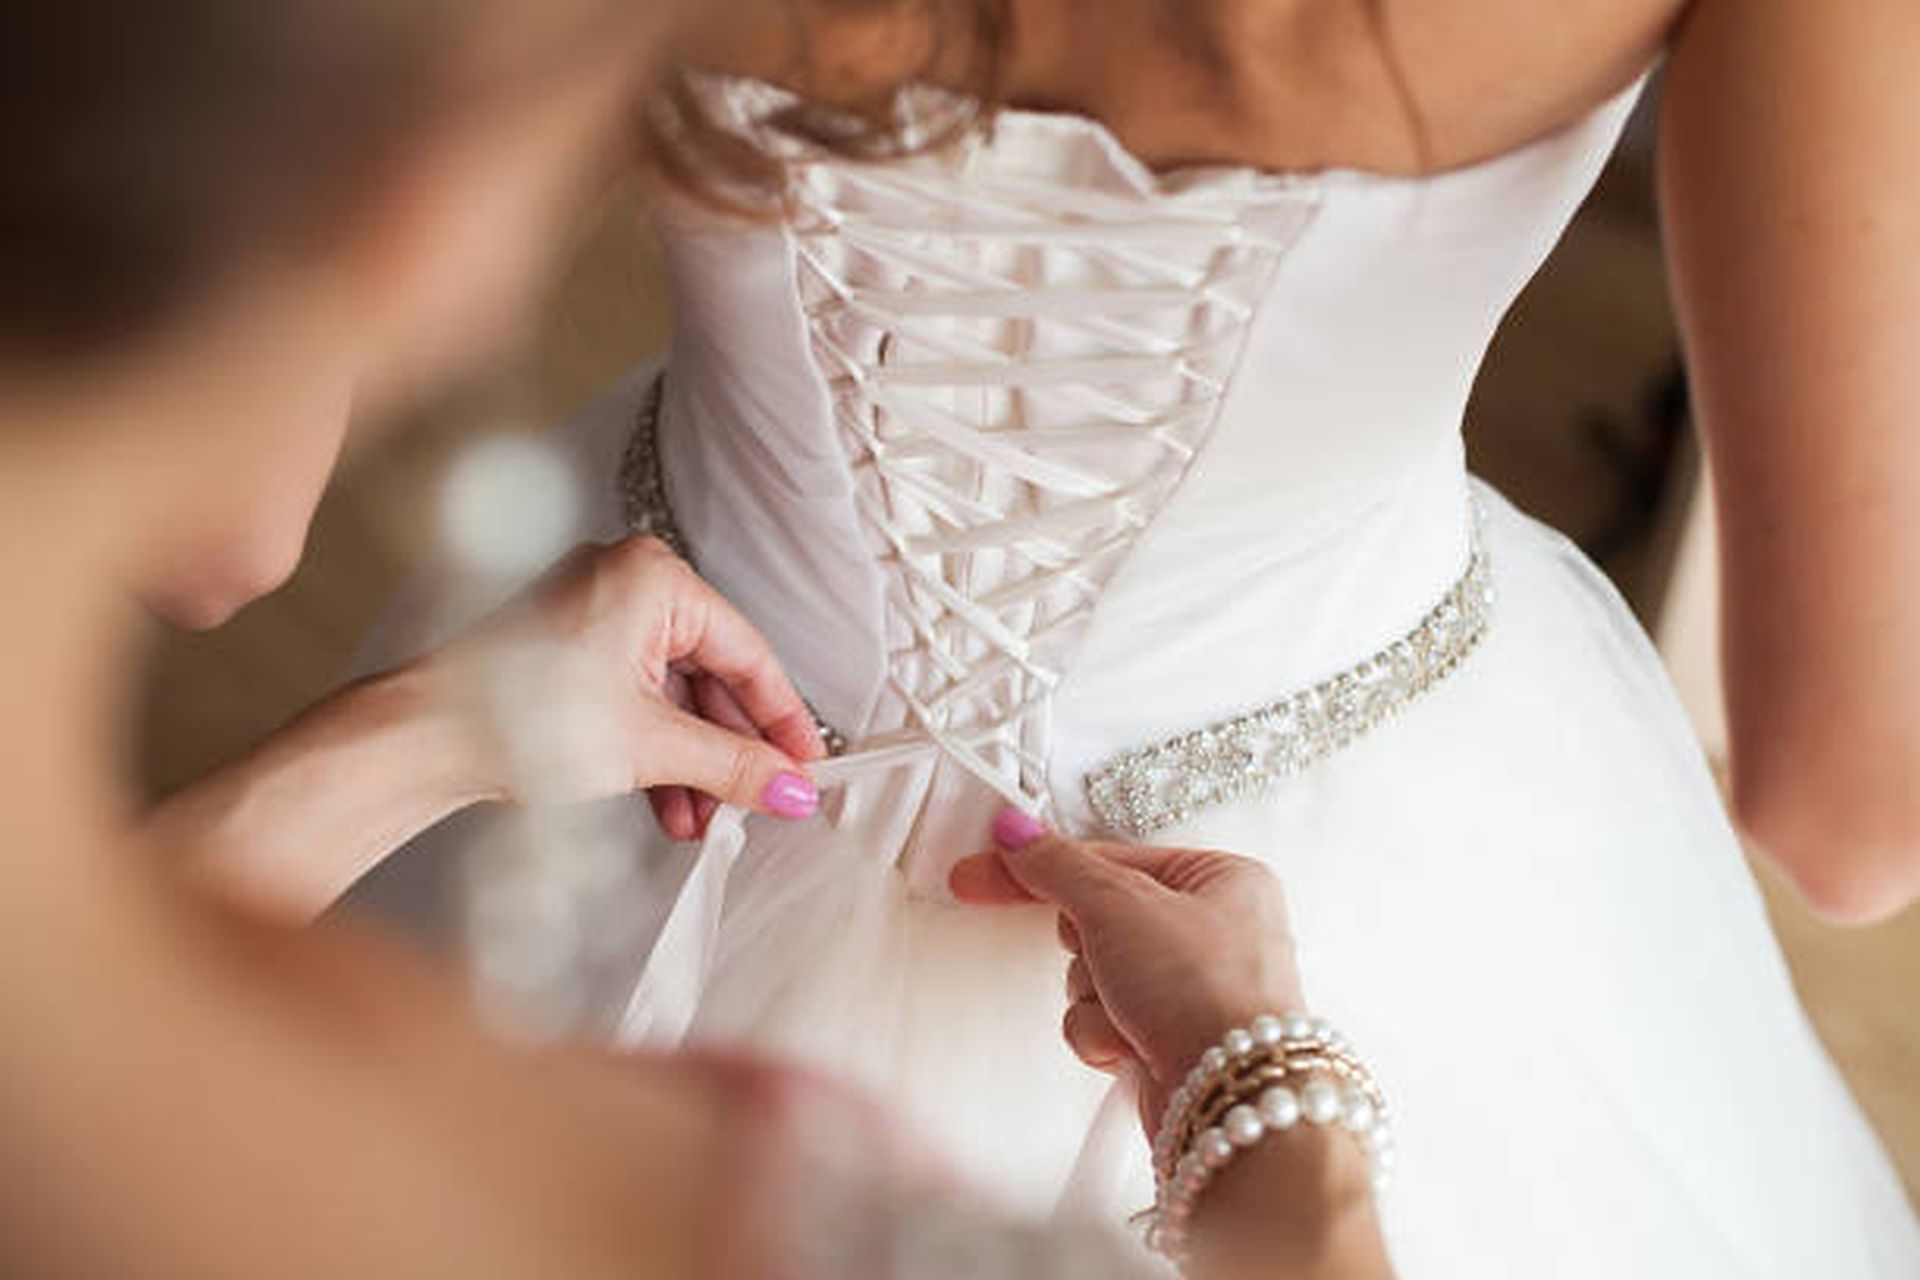 What Undergarments Are Needed For A Wedding Dress?